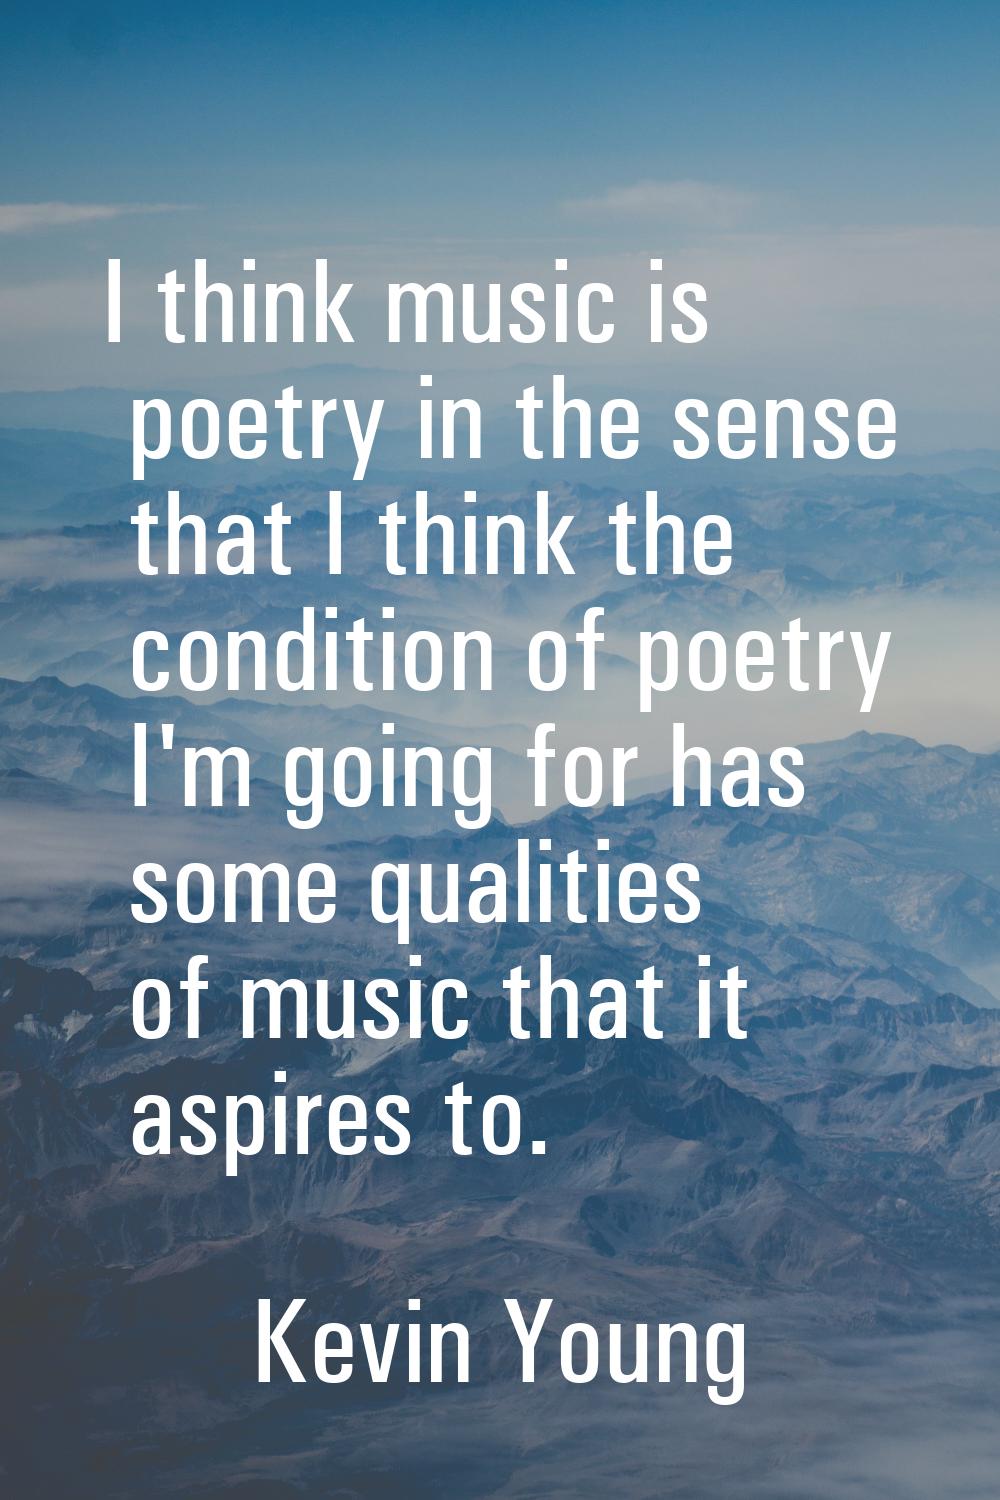 I think music is poetry in the sense that I think the condition of poetry I'm going for has some qu